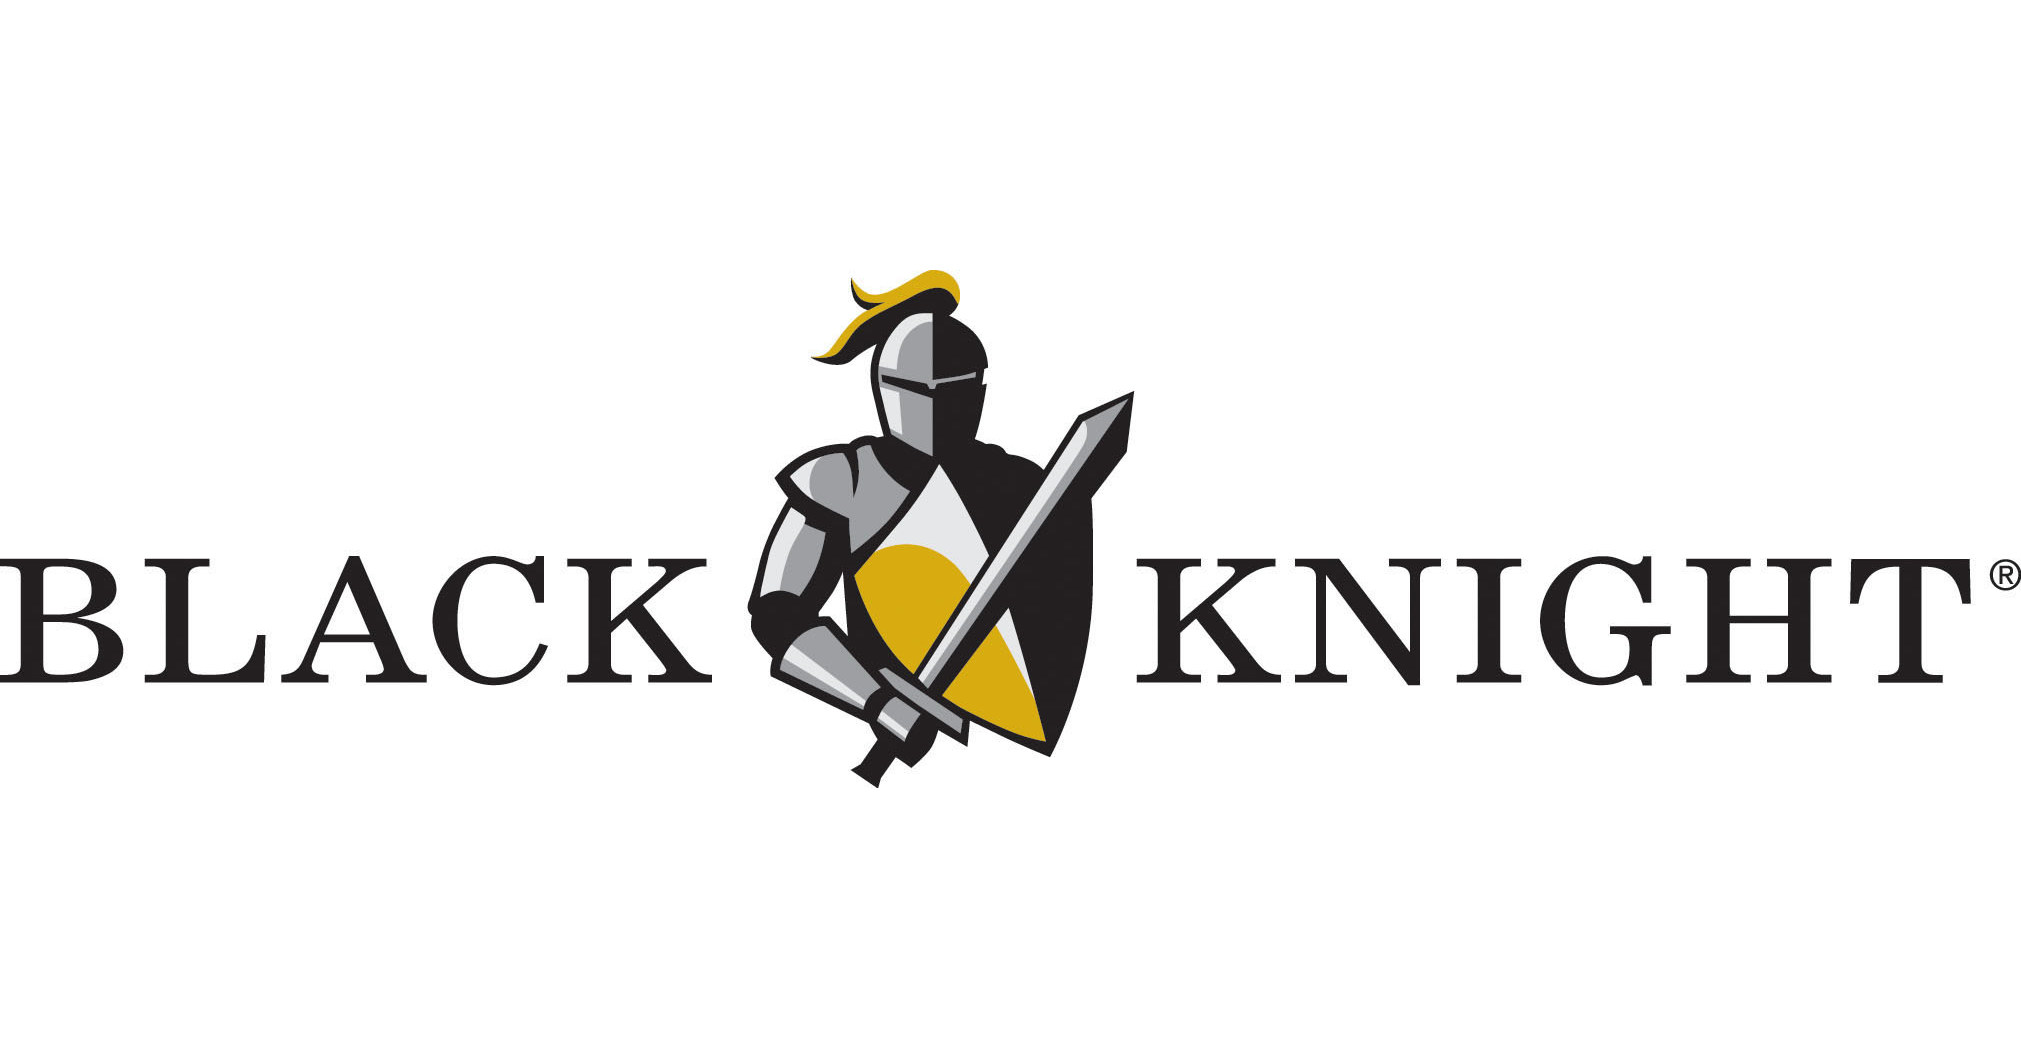 Black Knight: Home Prices Down Again in August With Average Home Nationally Now 2% Off June Peak; Inventory Growth Stalls as Sellers Step Back USA